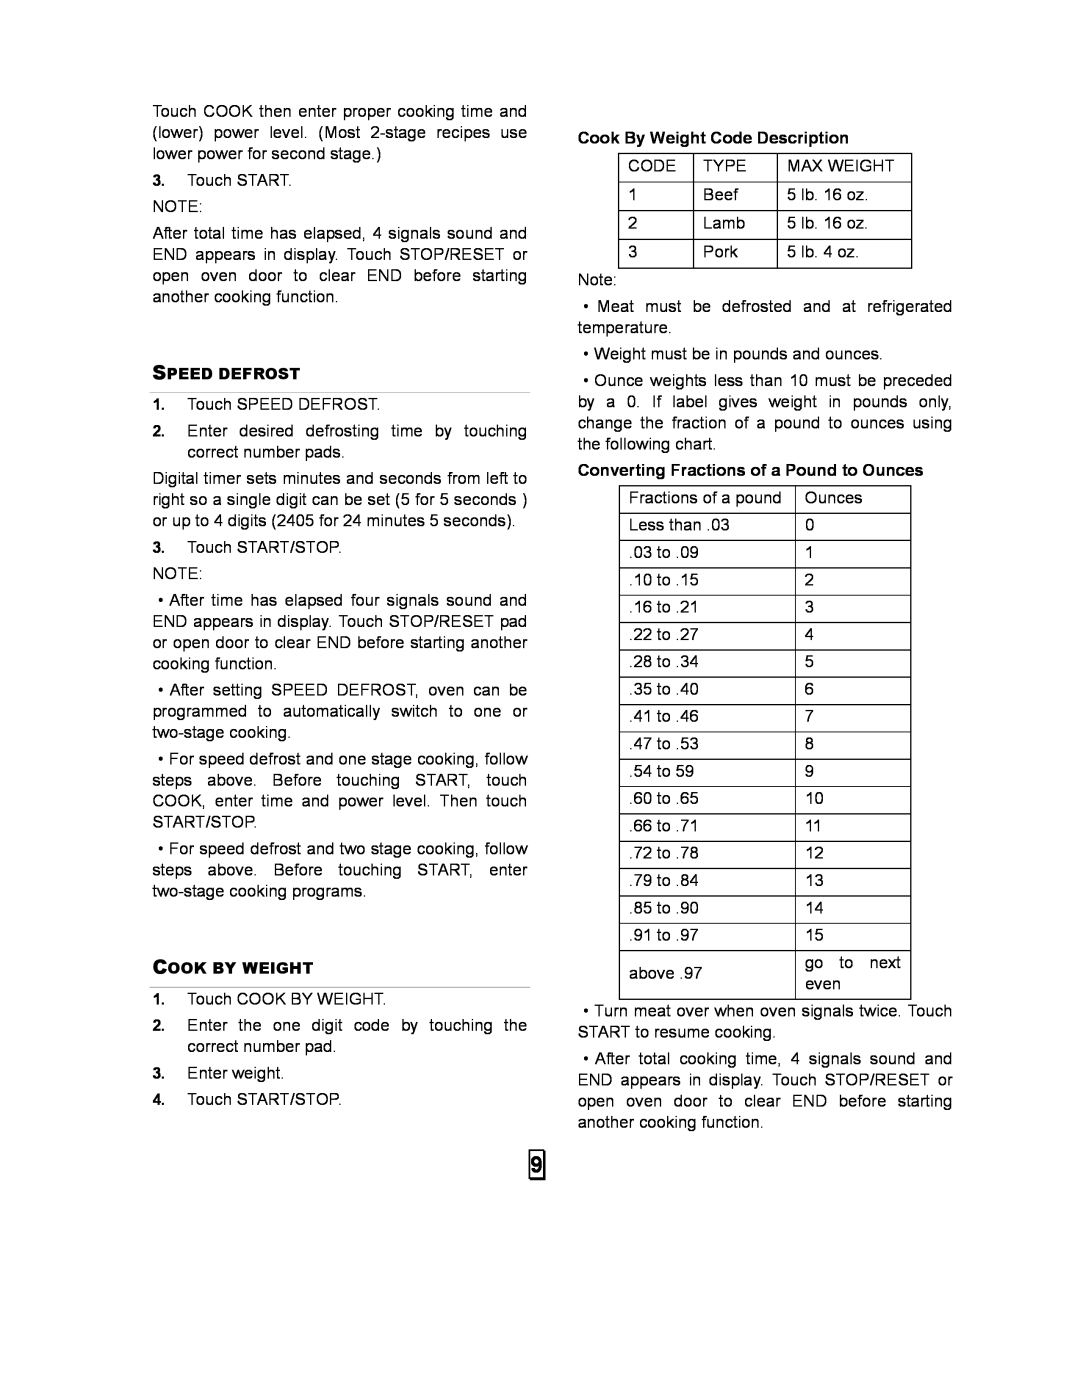 Kenmore 87103 user manual Cook By Weight Code Description, Converting Fractions of a Pound to Ounces 